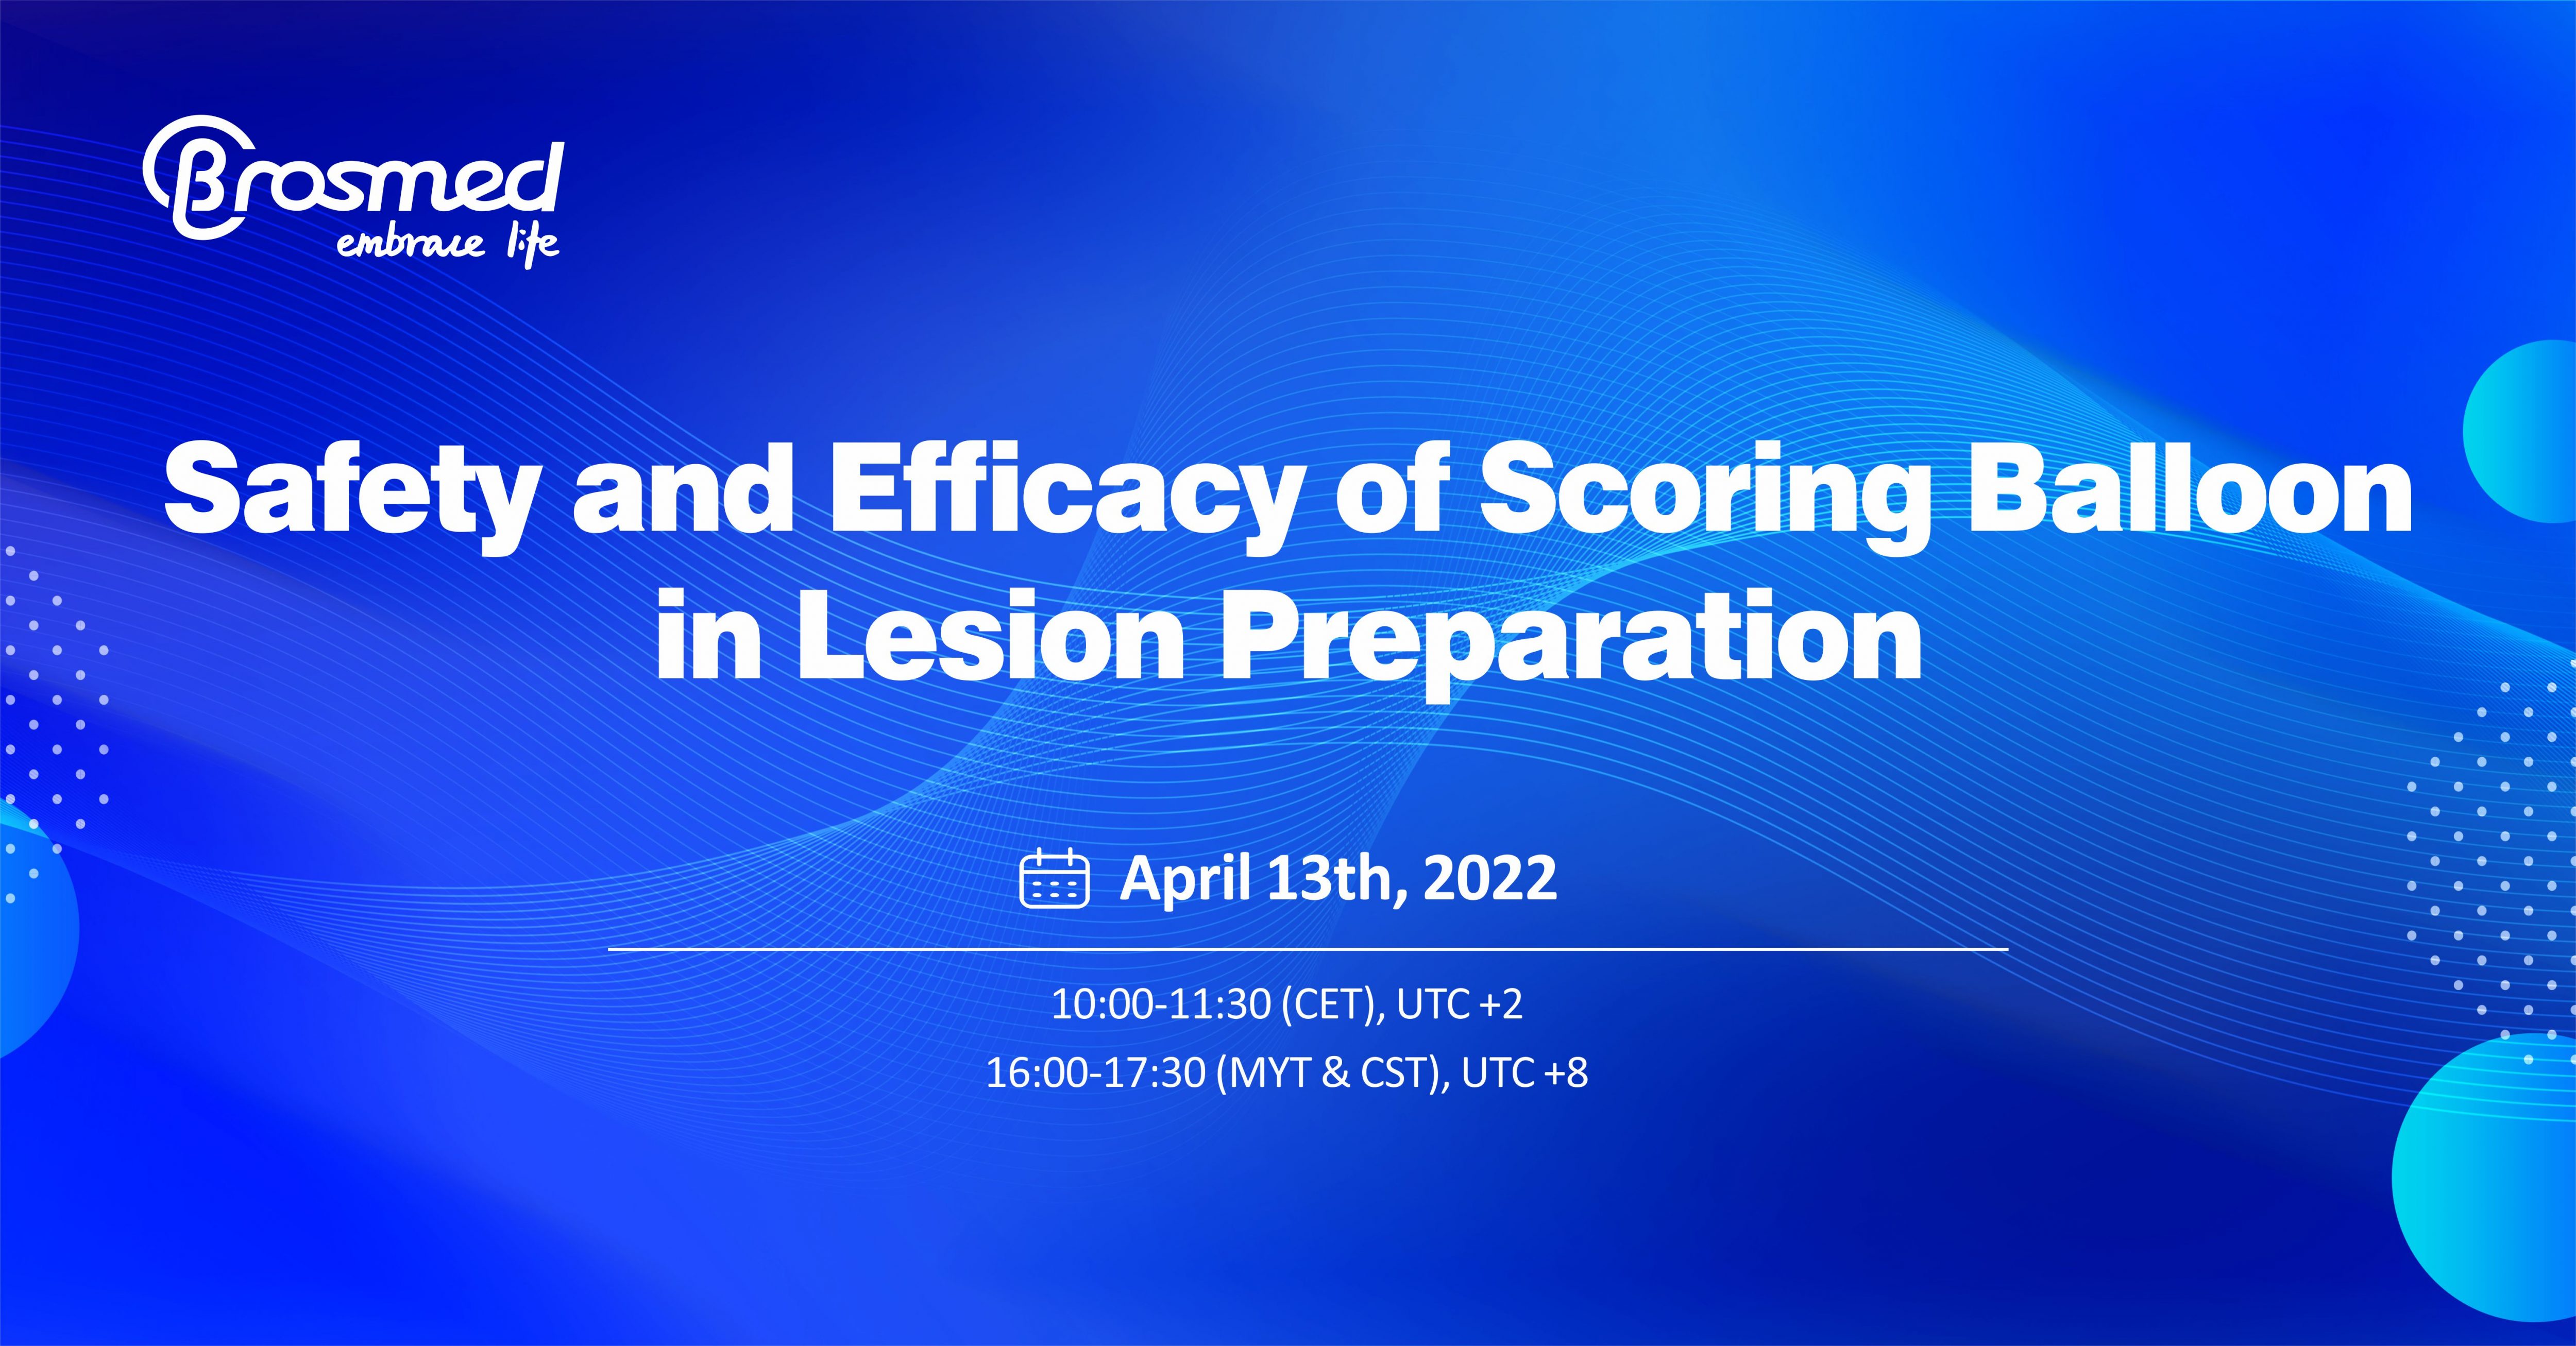 Webinar Express：Safety and Efficacy of Scoring Balloon in Lesion Preparation